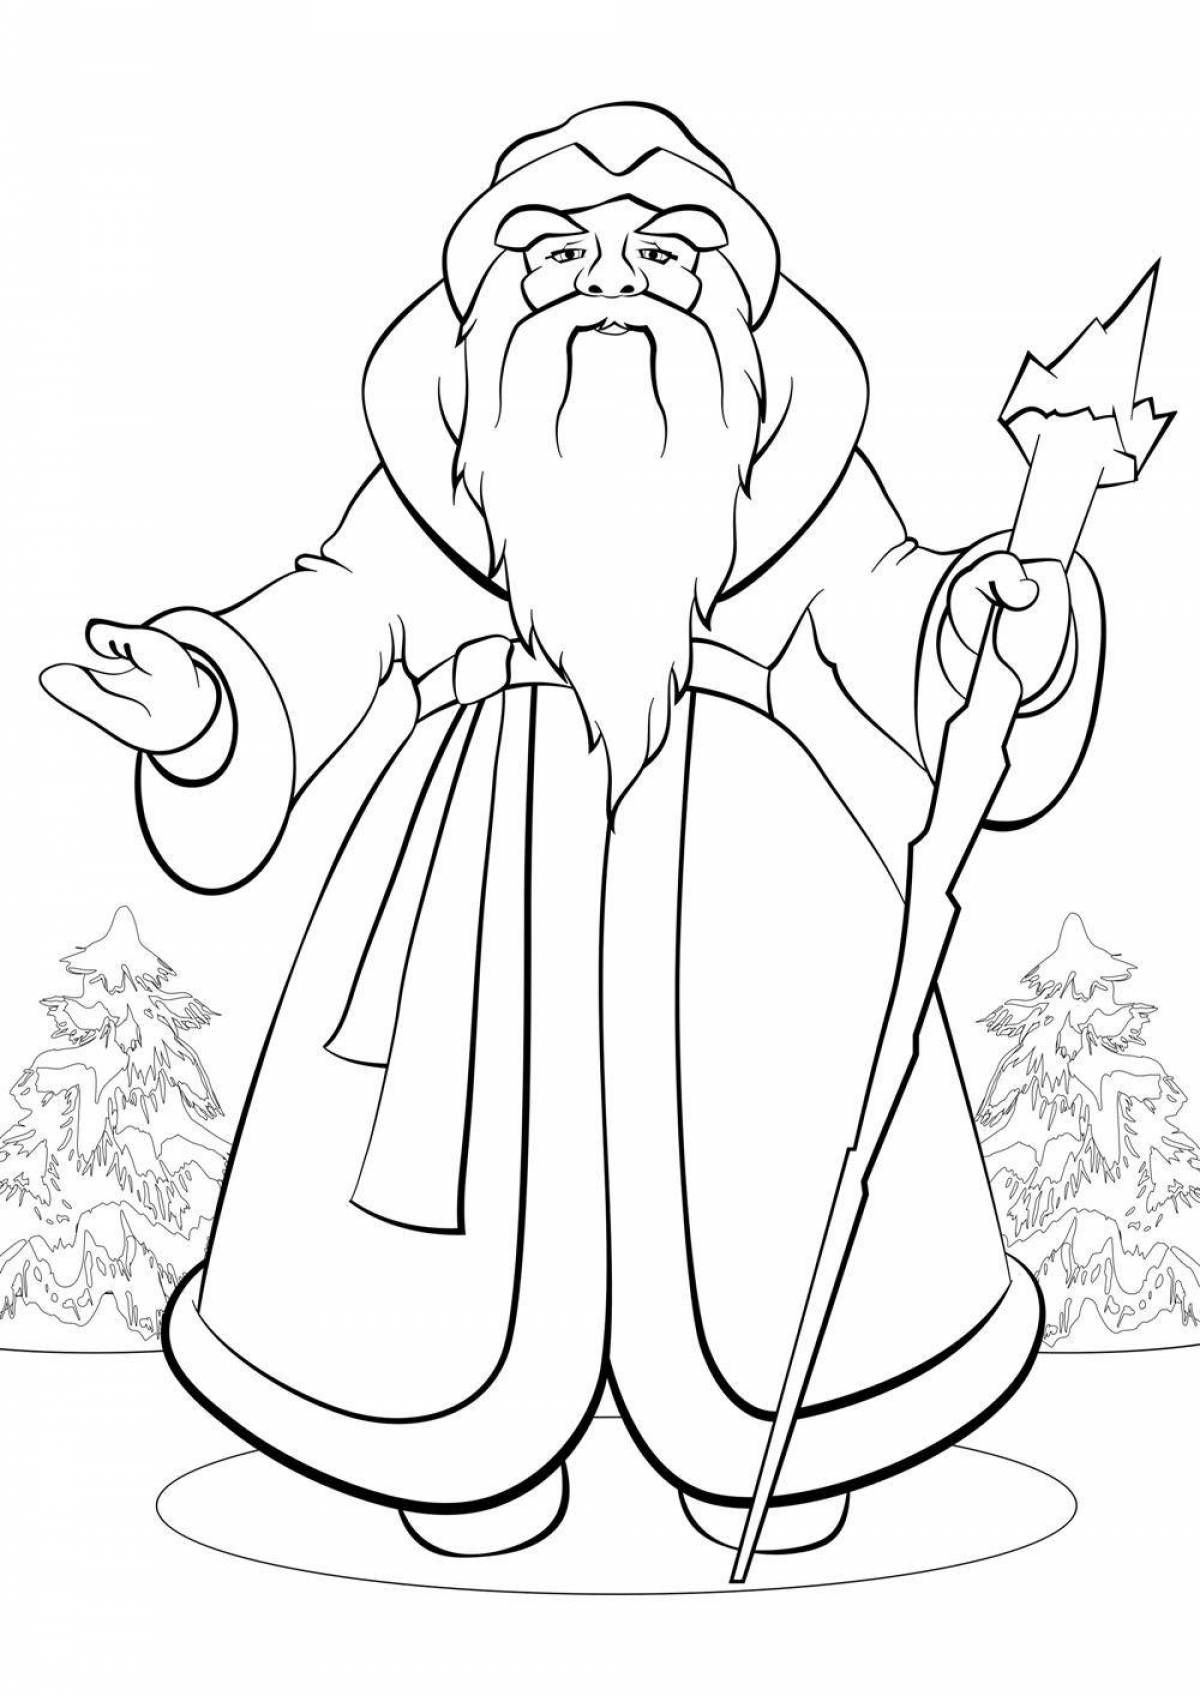 Coloring page joyful governor frost